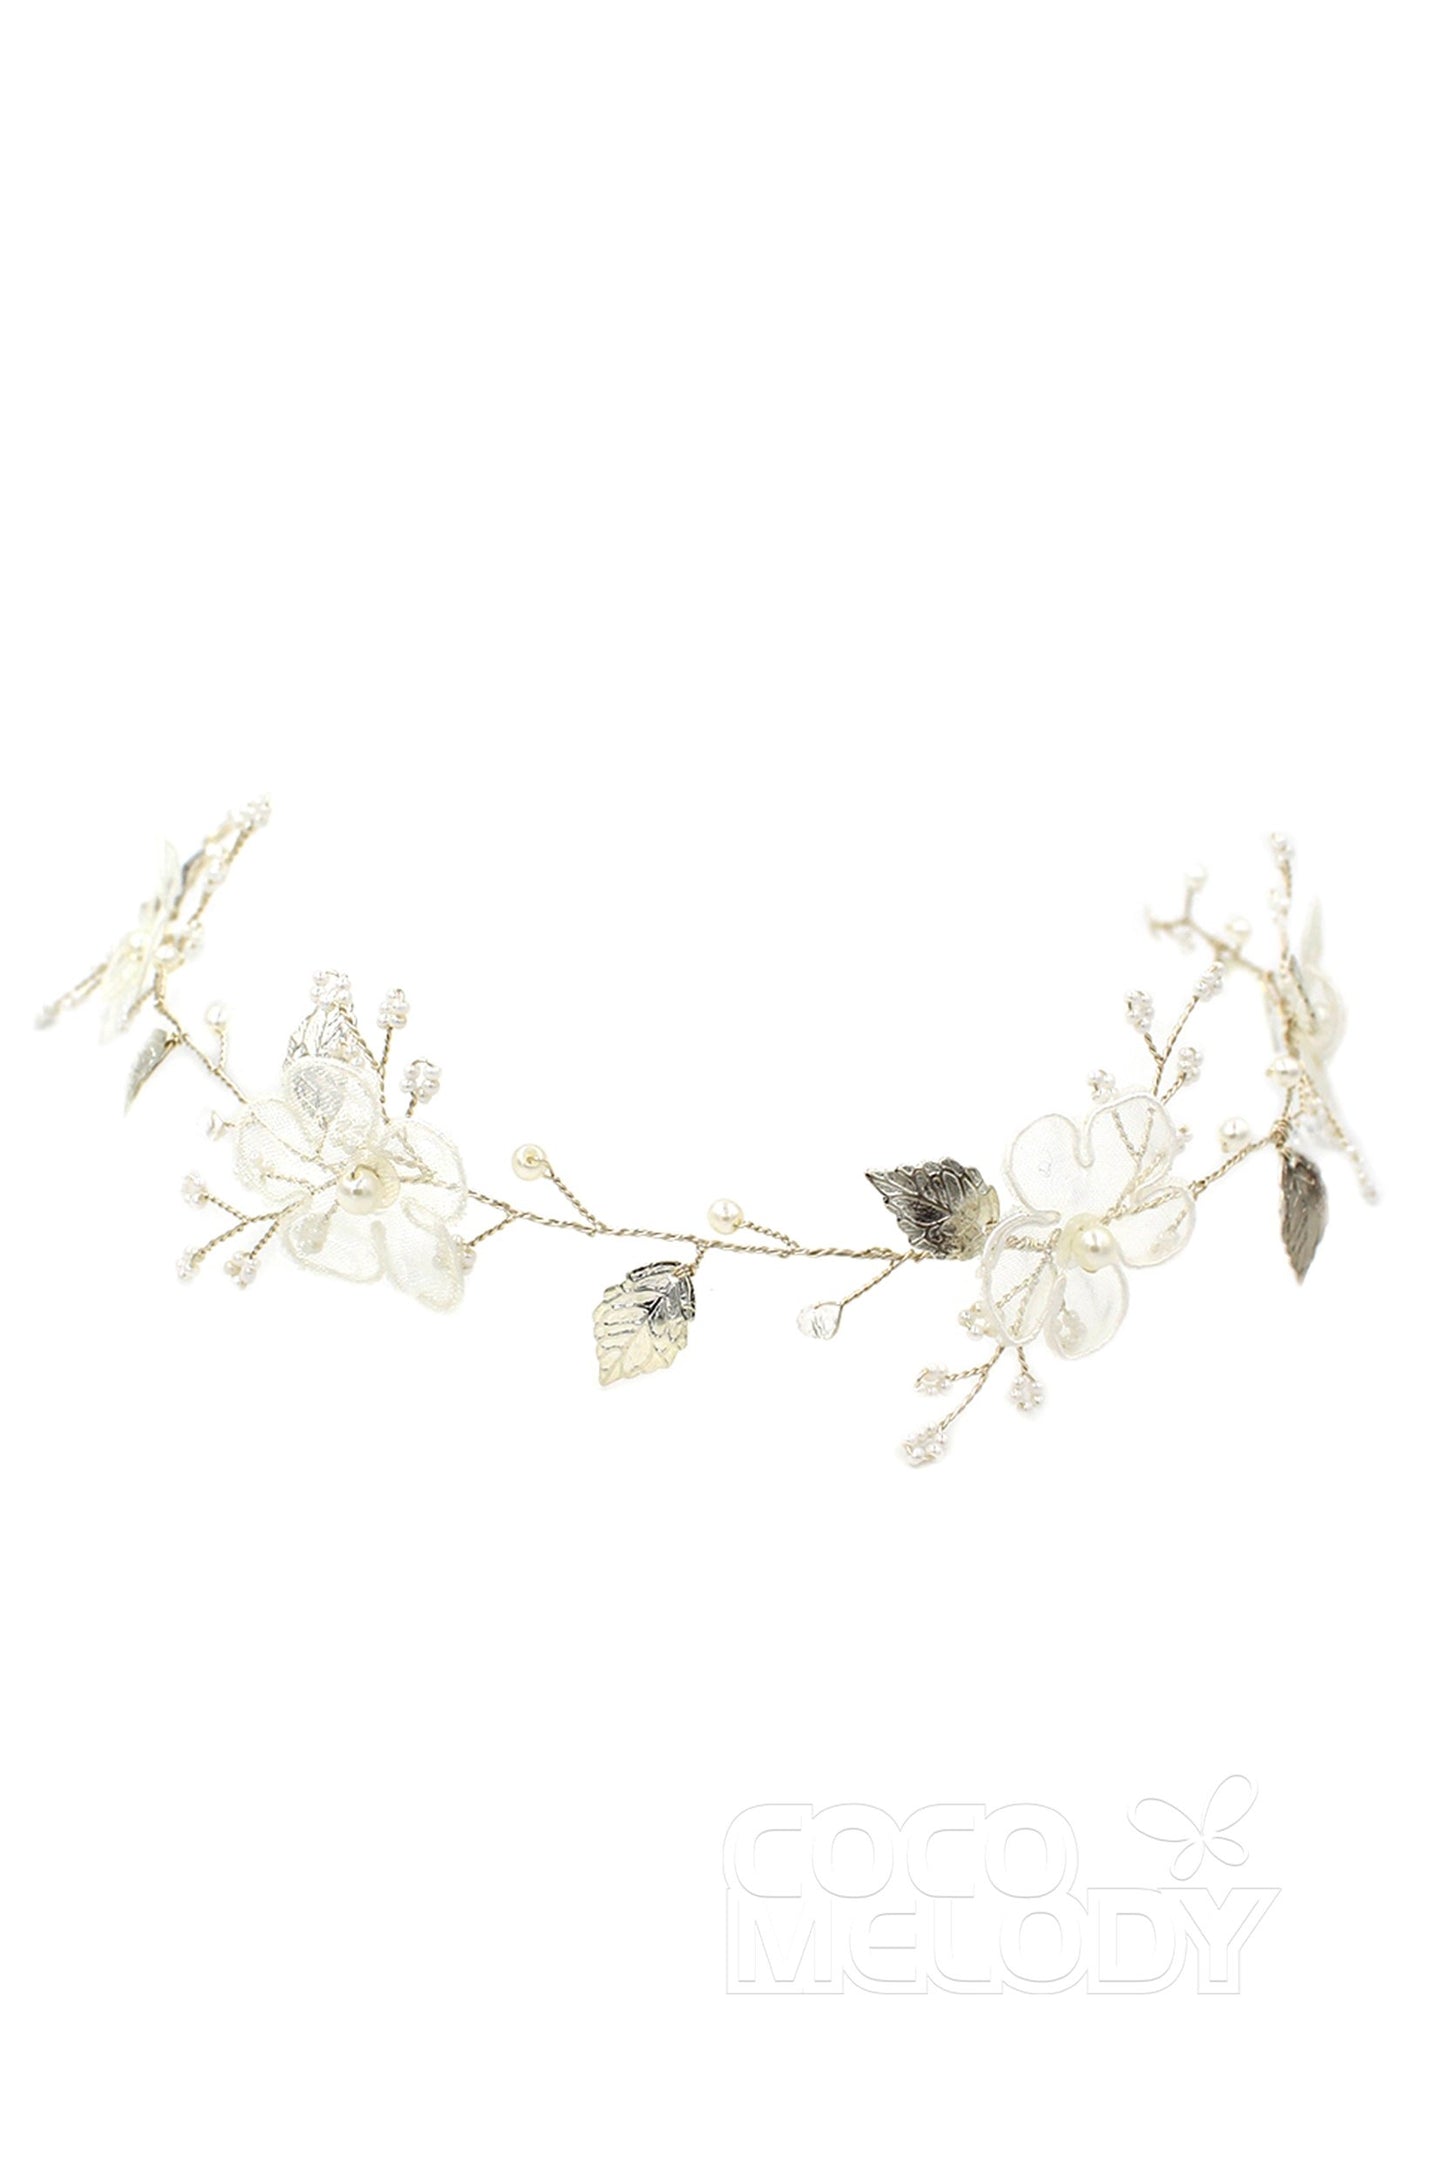 Alloy Headbands with Pearls and Flower CH0314